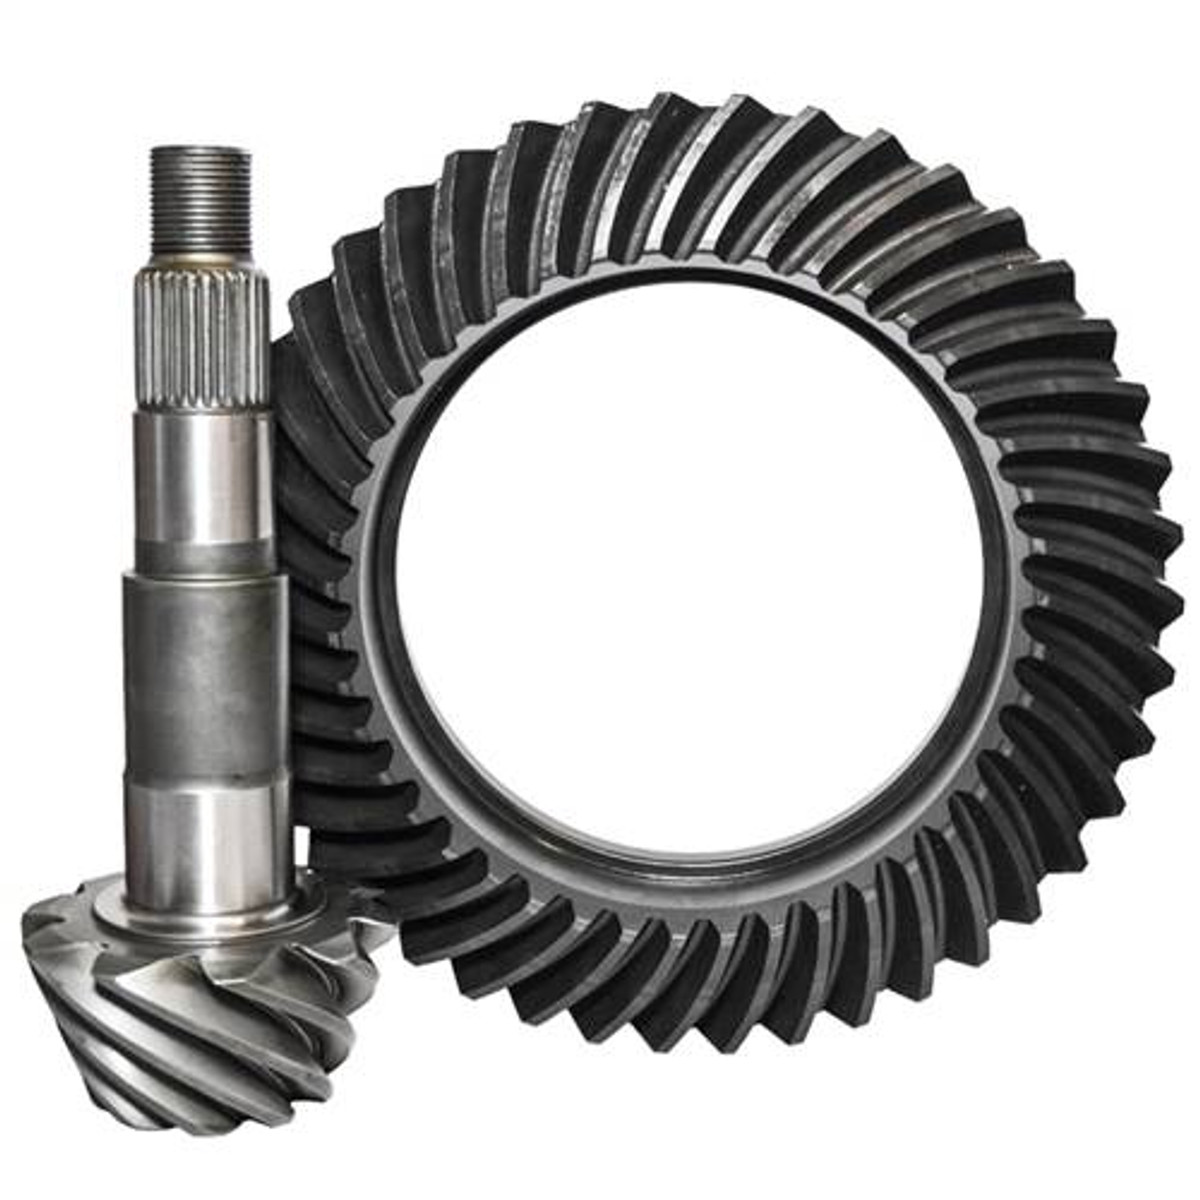 AAM 11.8 Inch 4.56 Ratio Dodge Chevy GMC Nitro Ring & Pinion AAM11.8-456-NG